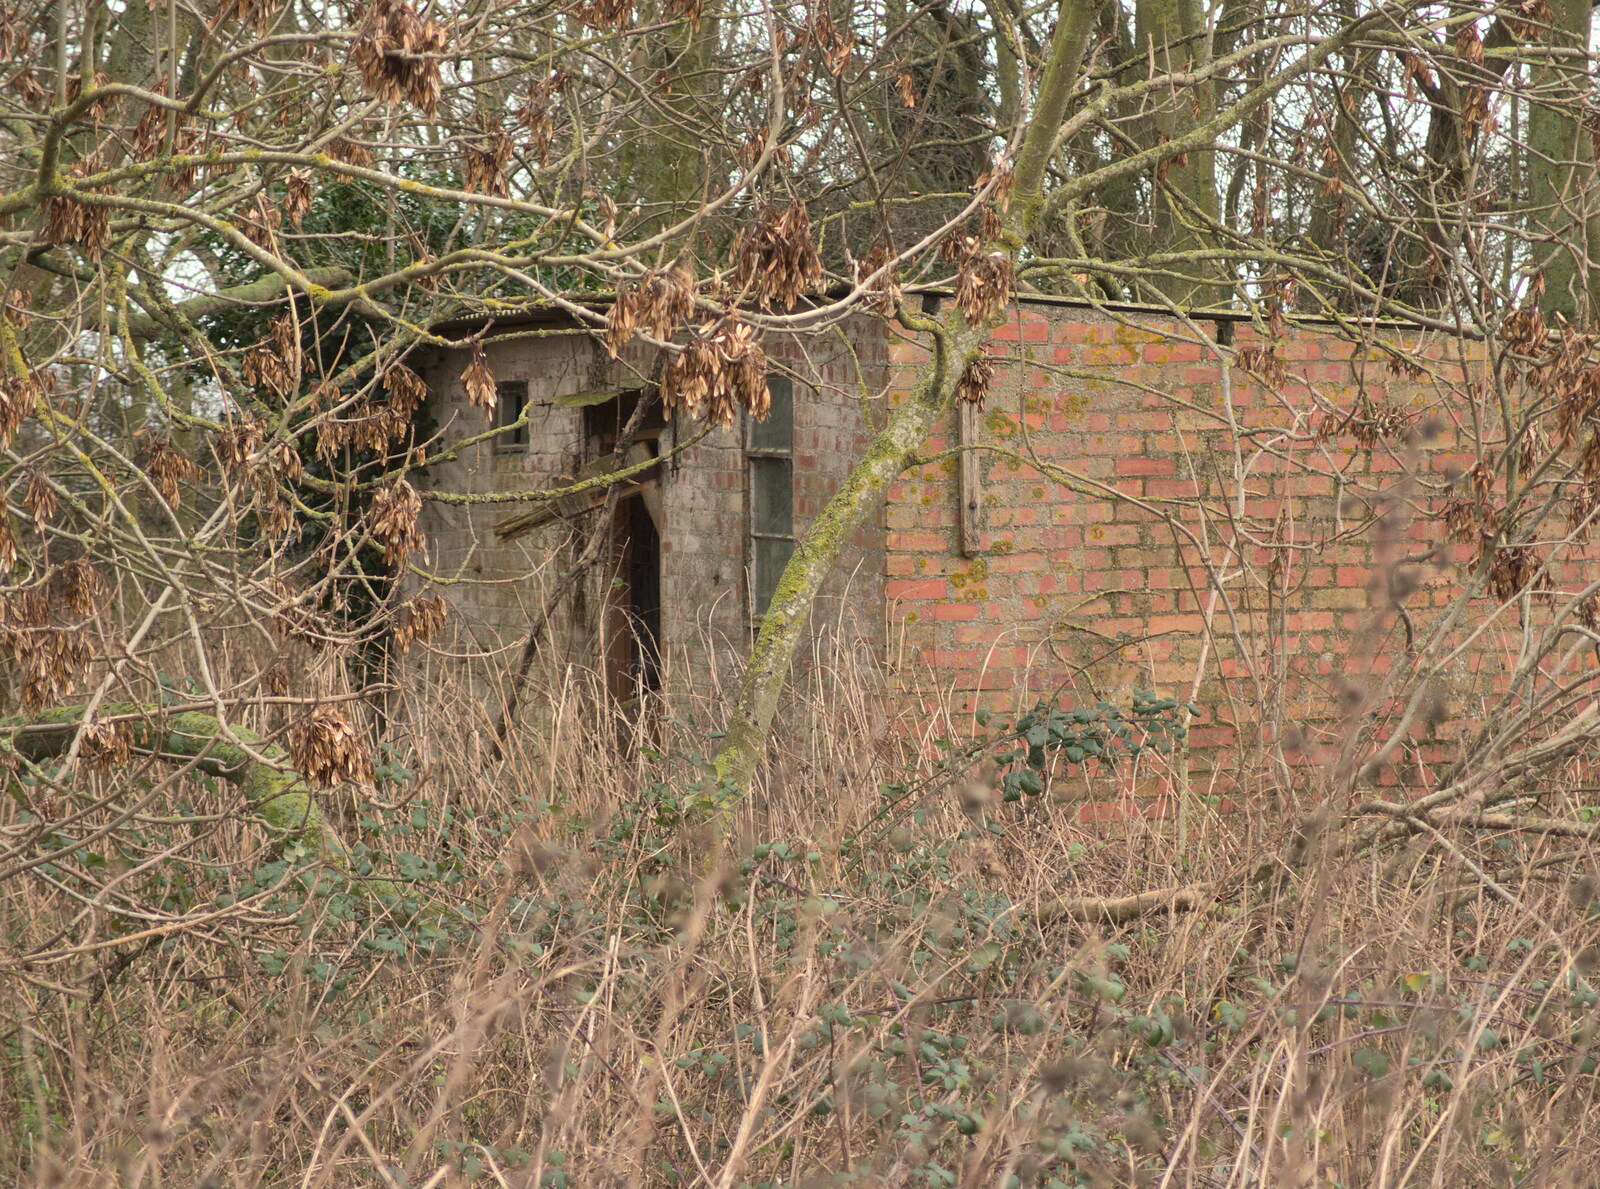 Another derelict building in the trees from New Year's Eve With The BBs, The Barrel, Banham, Norfolk - 31st December 2015